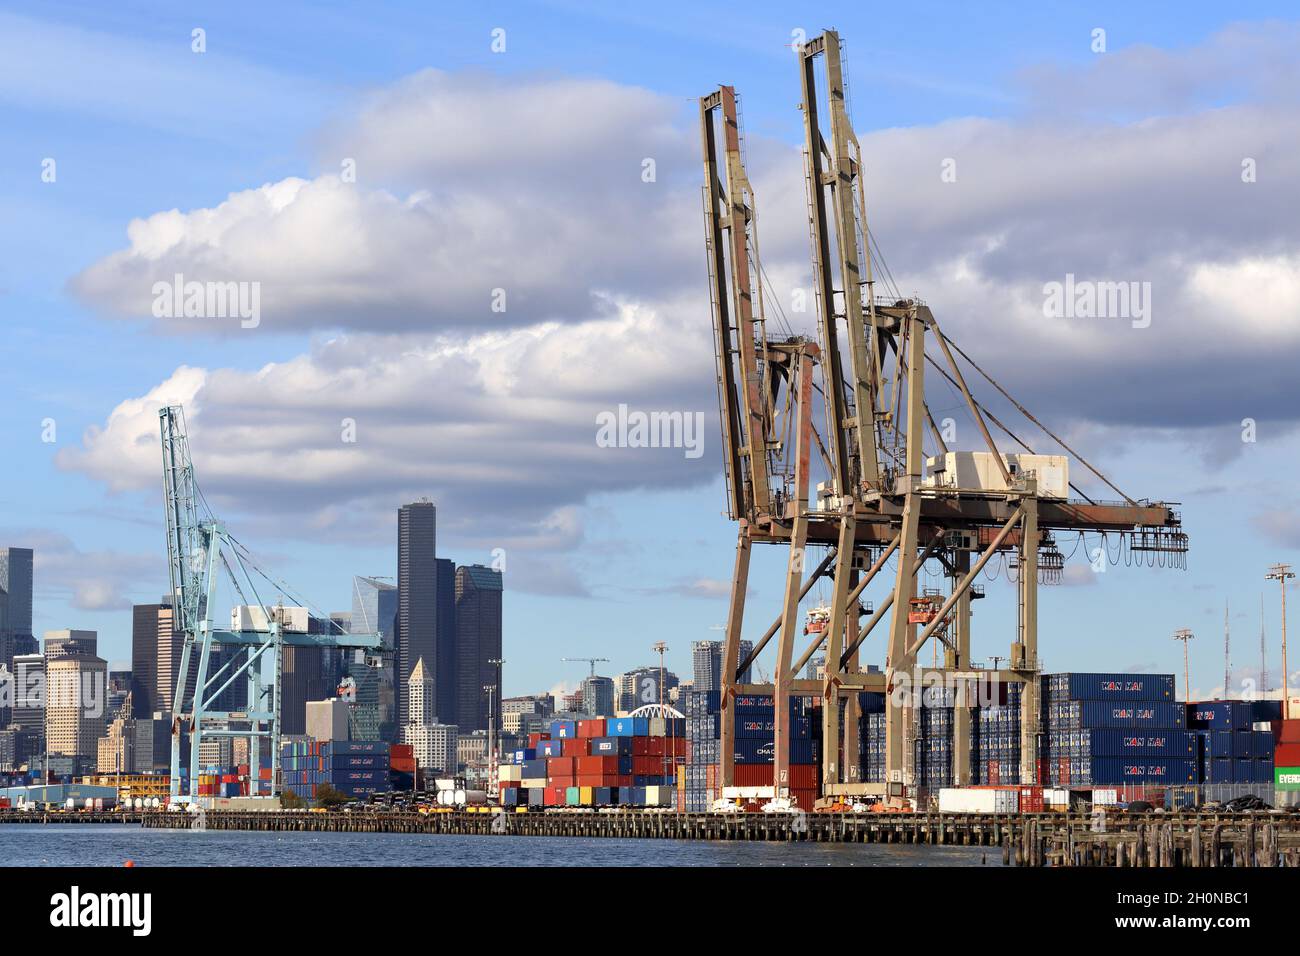 Container cranes at Terminal 25 and Terminal 30 at the Port of Seattle, Washington with Seattle in the background. East waterway of the Duwamish River Stock Photo